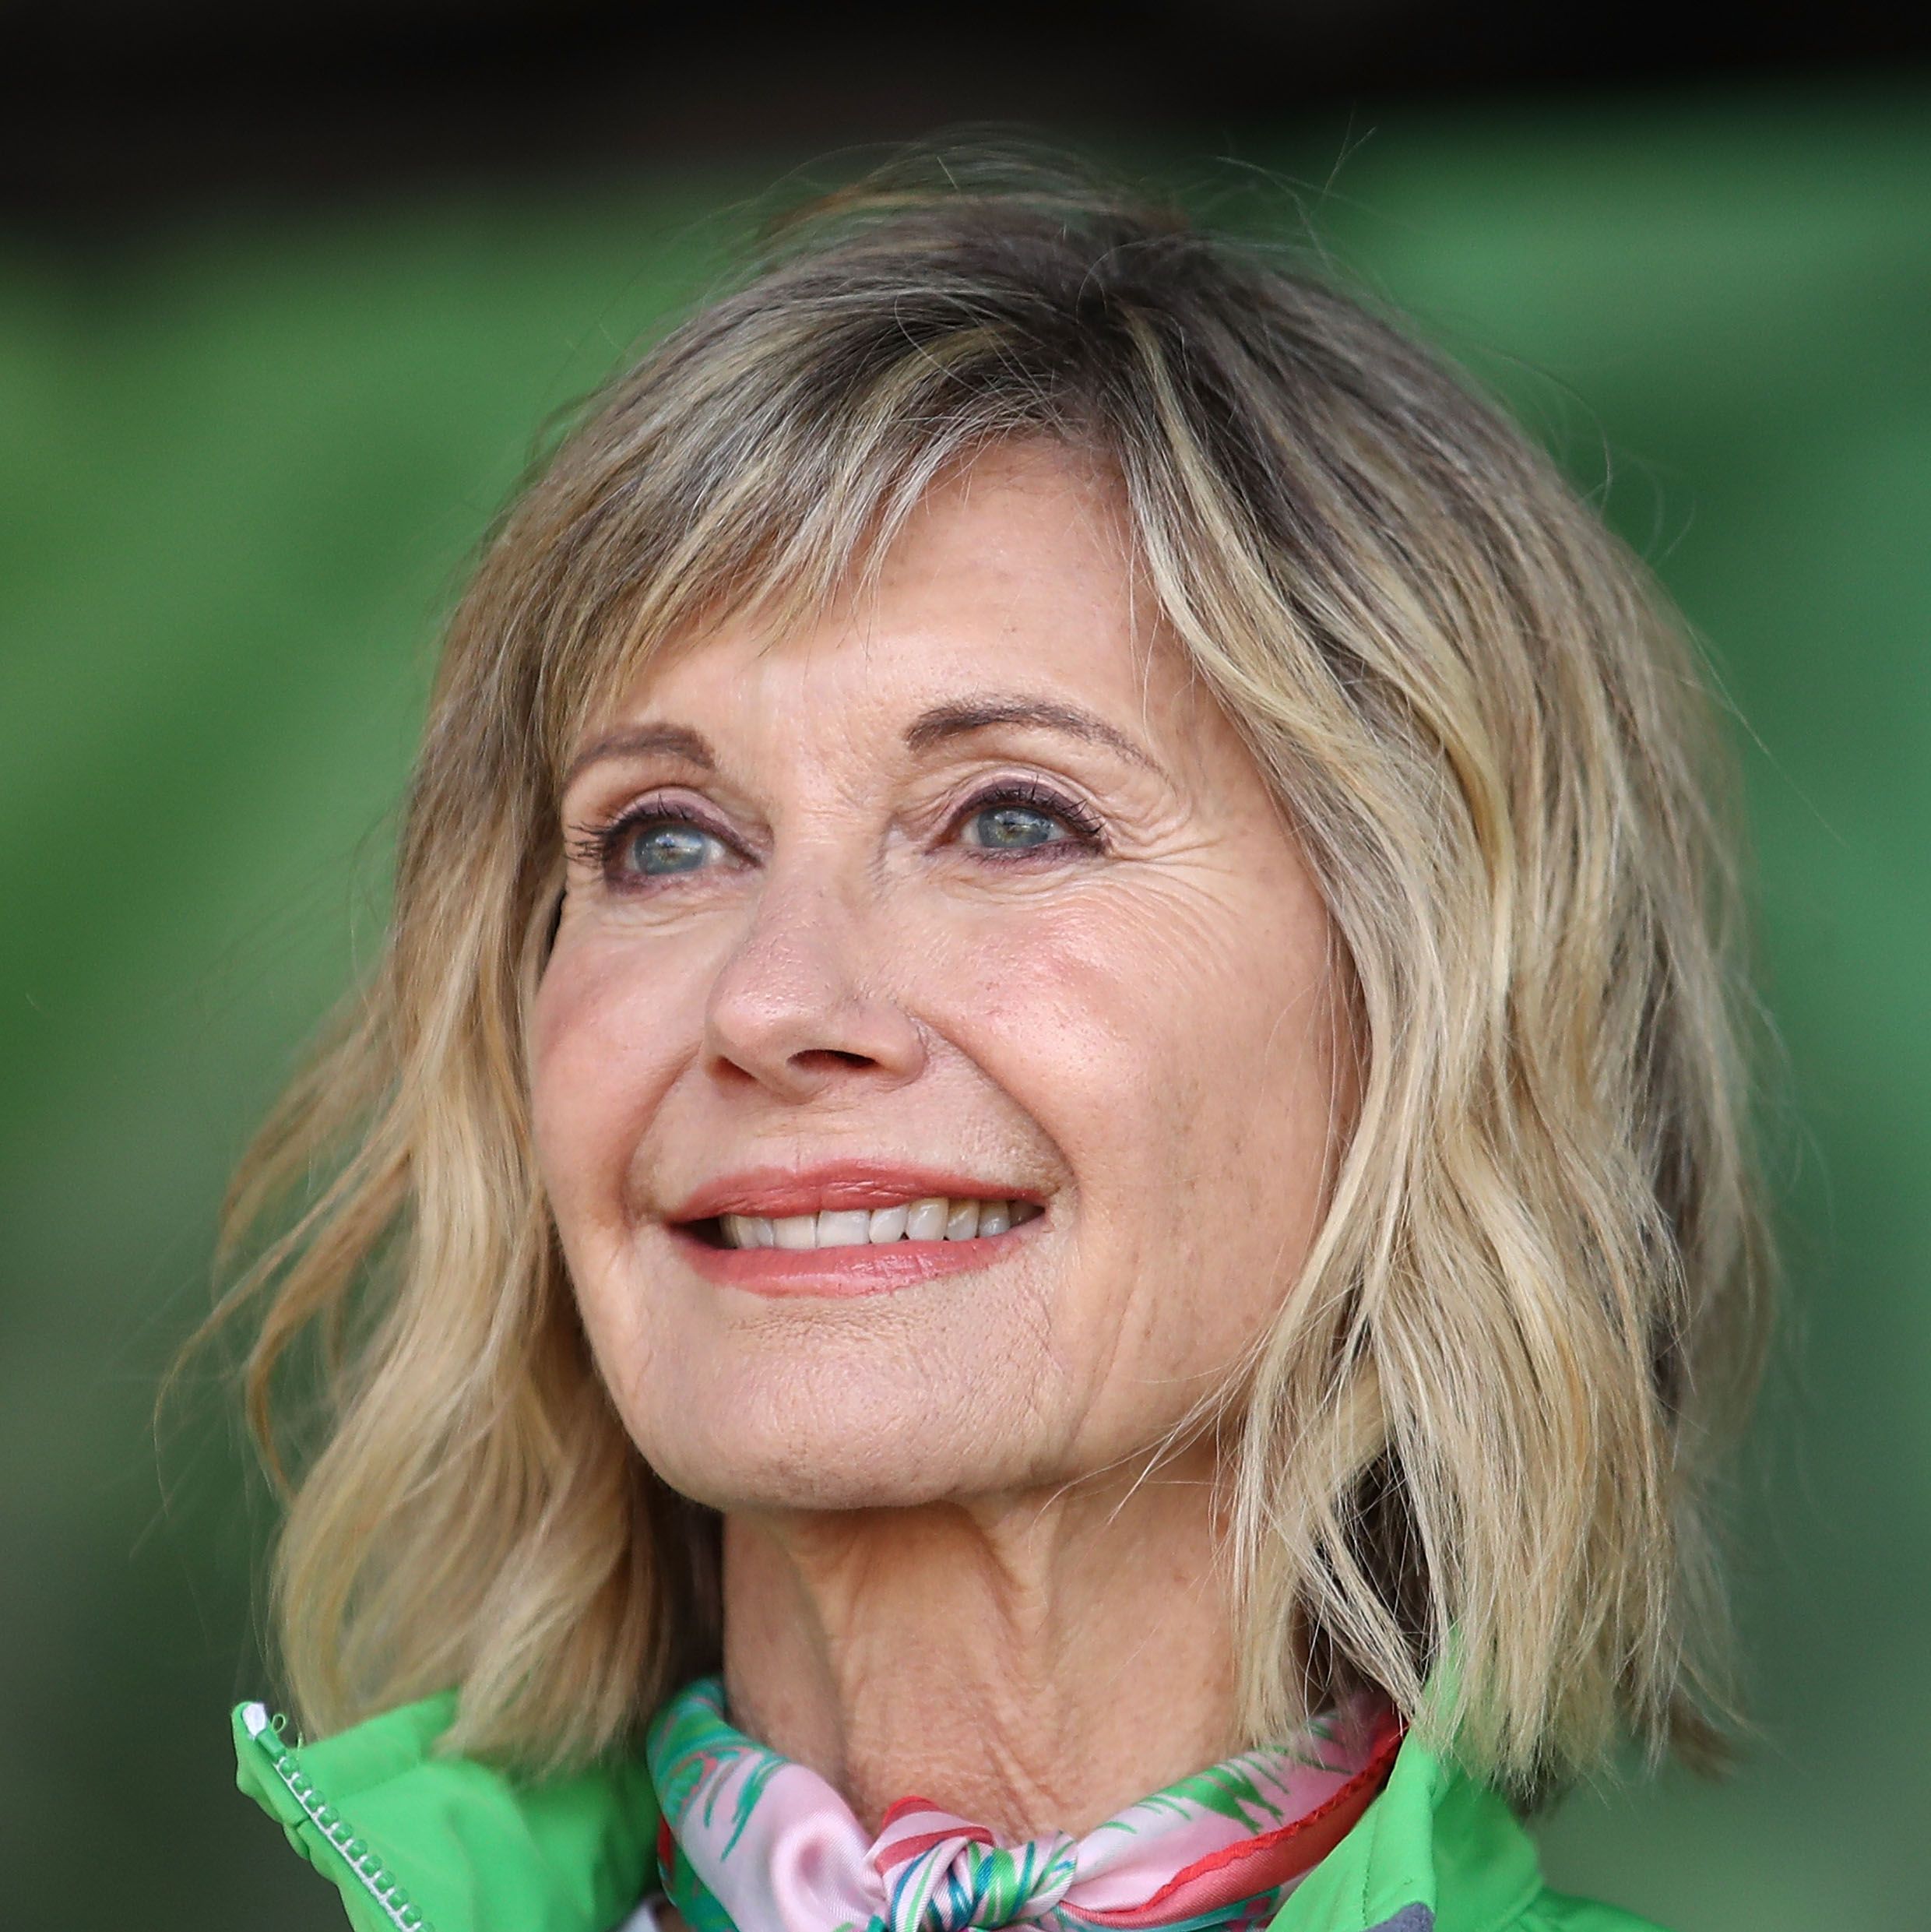 Olivia Newton-John Has Passed Away at 73 Years Old After Battling Cancer for More Than 30 Years